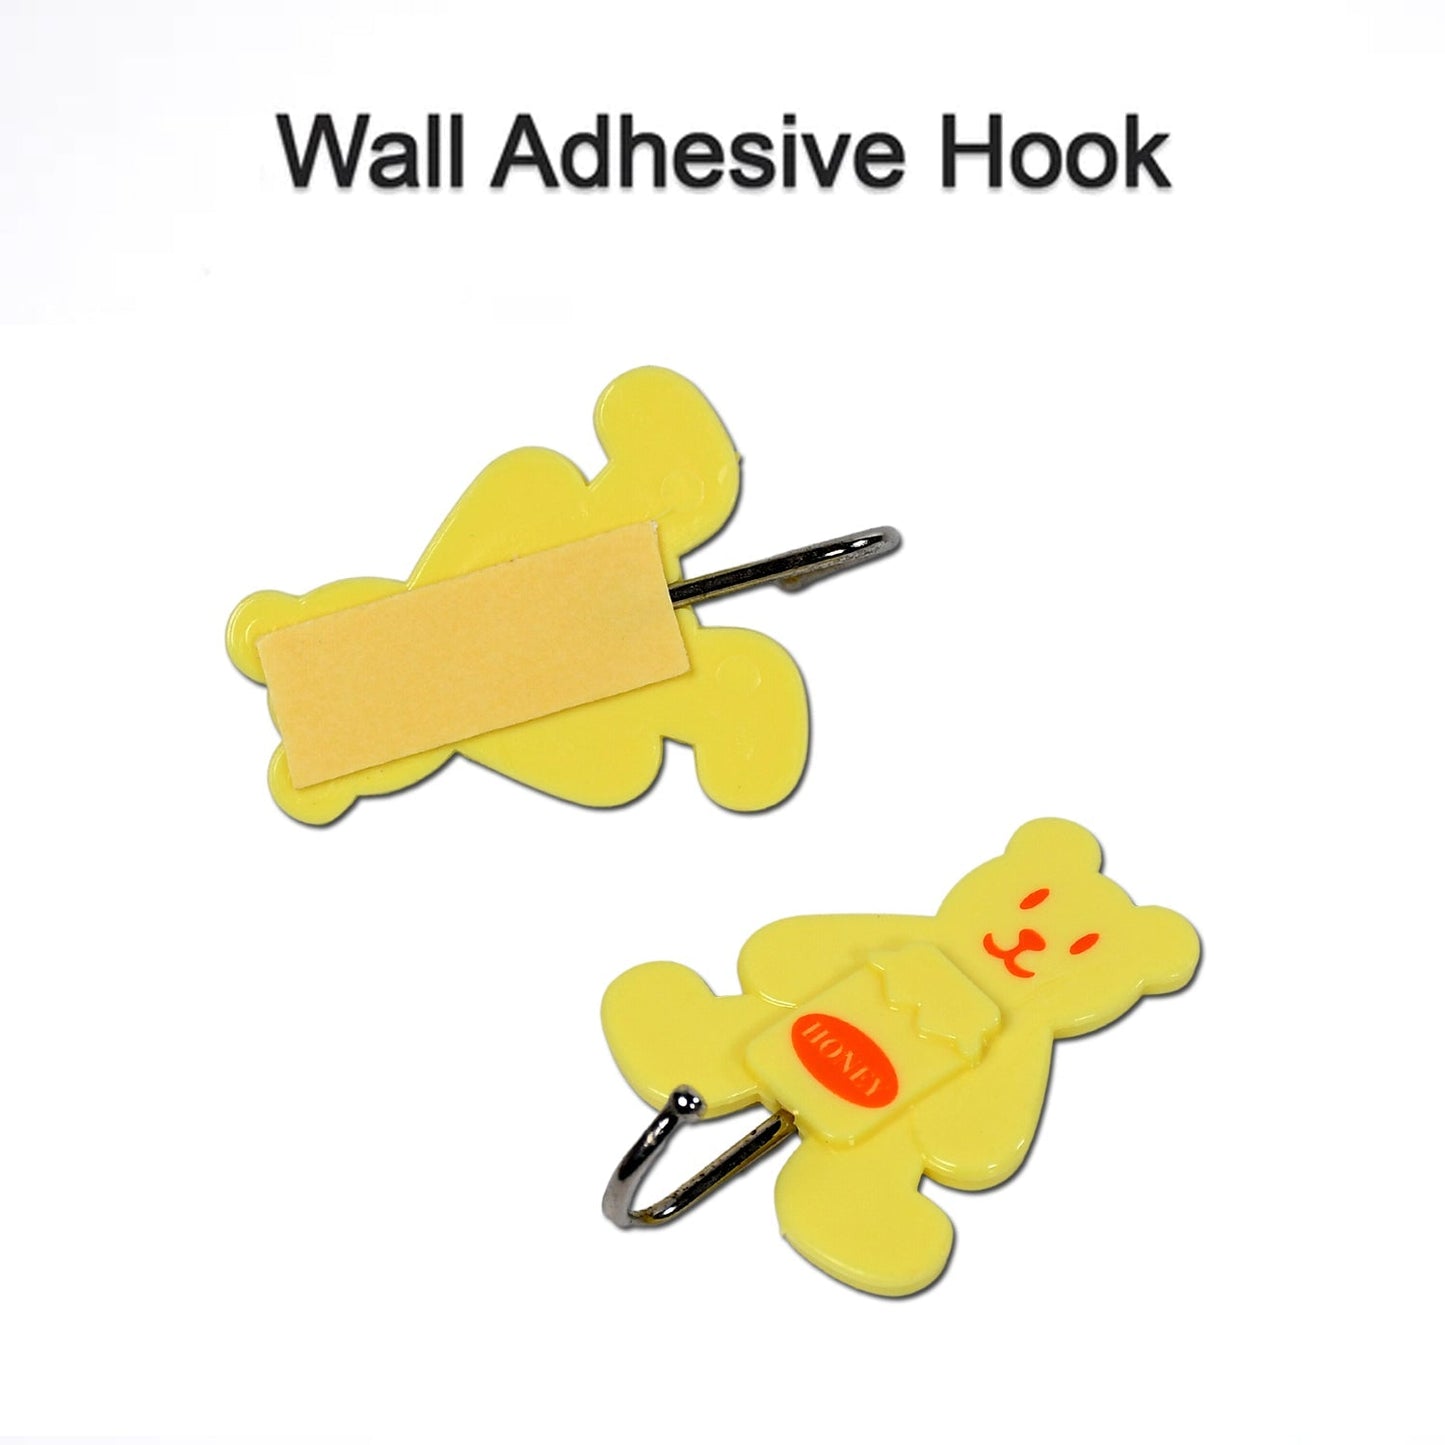 4498 Teddy Bear Strong Adhesive Hook Wall Hooks High Quality Premium Hook For Home , Office , & Multiuse Hook ( 1 Pkt ) DeoDap